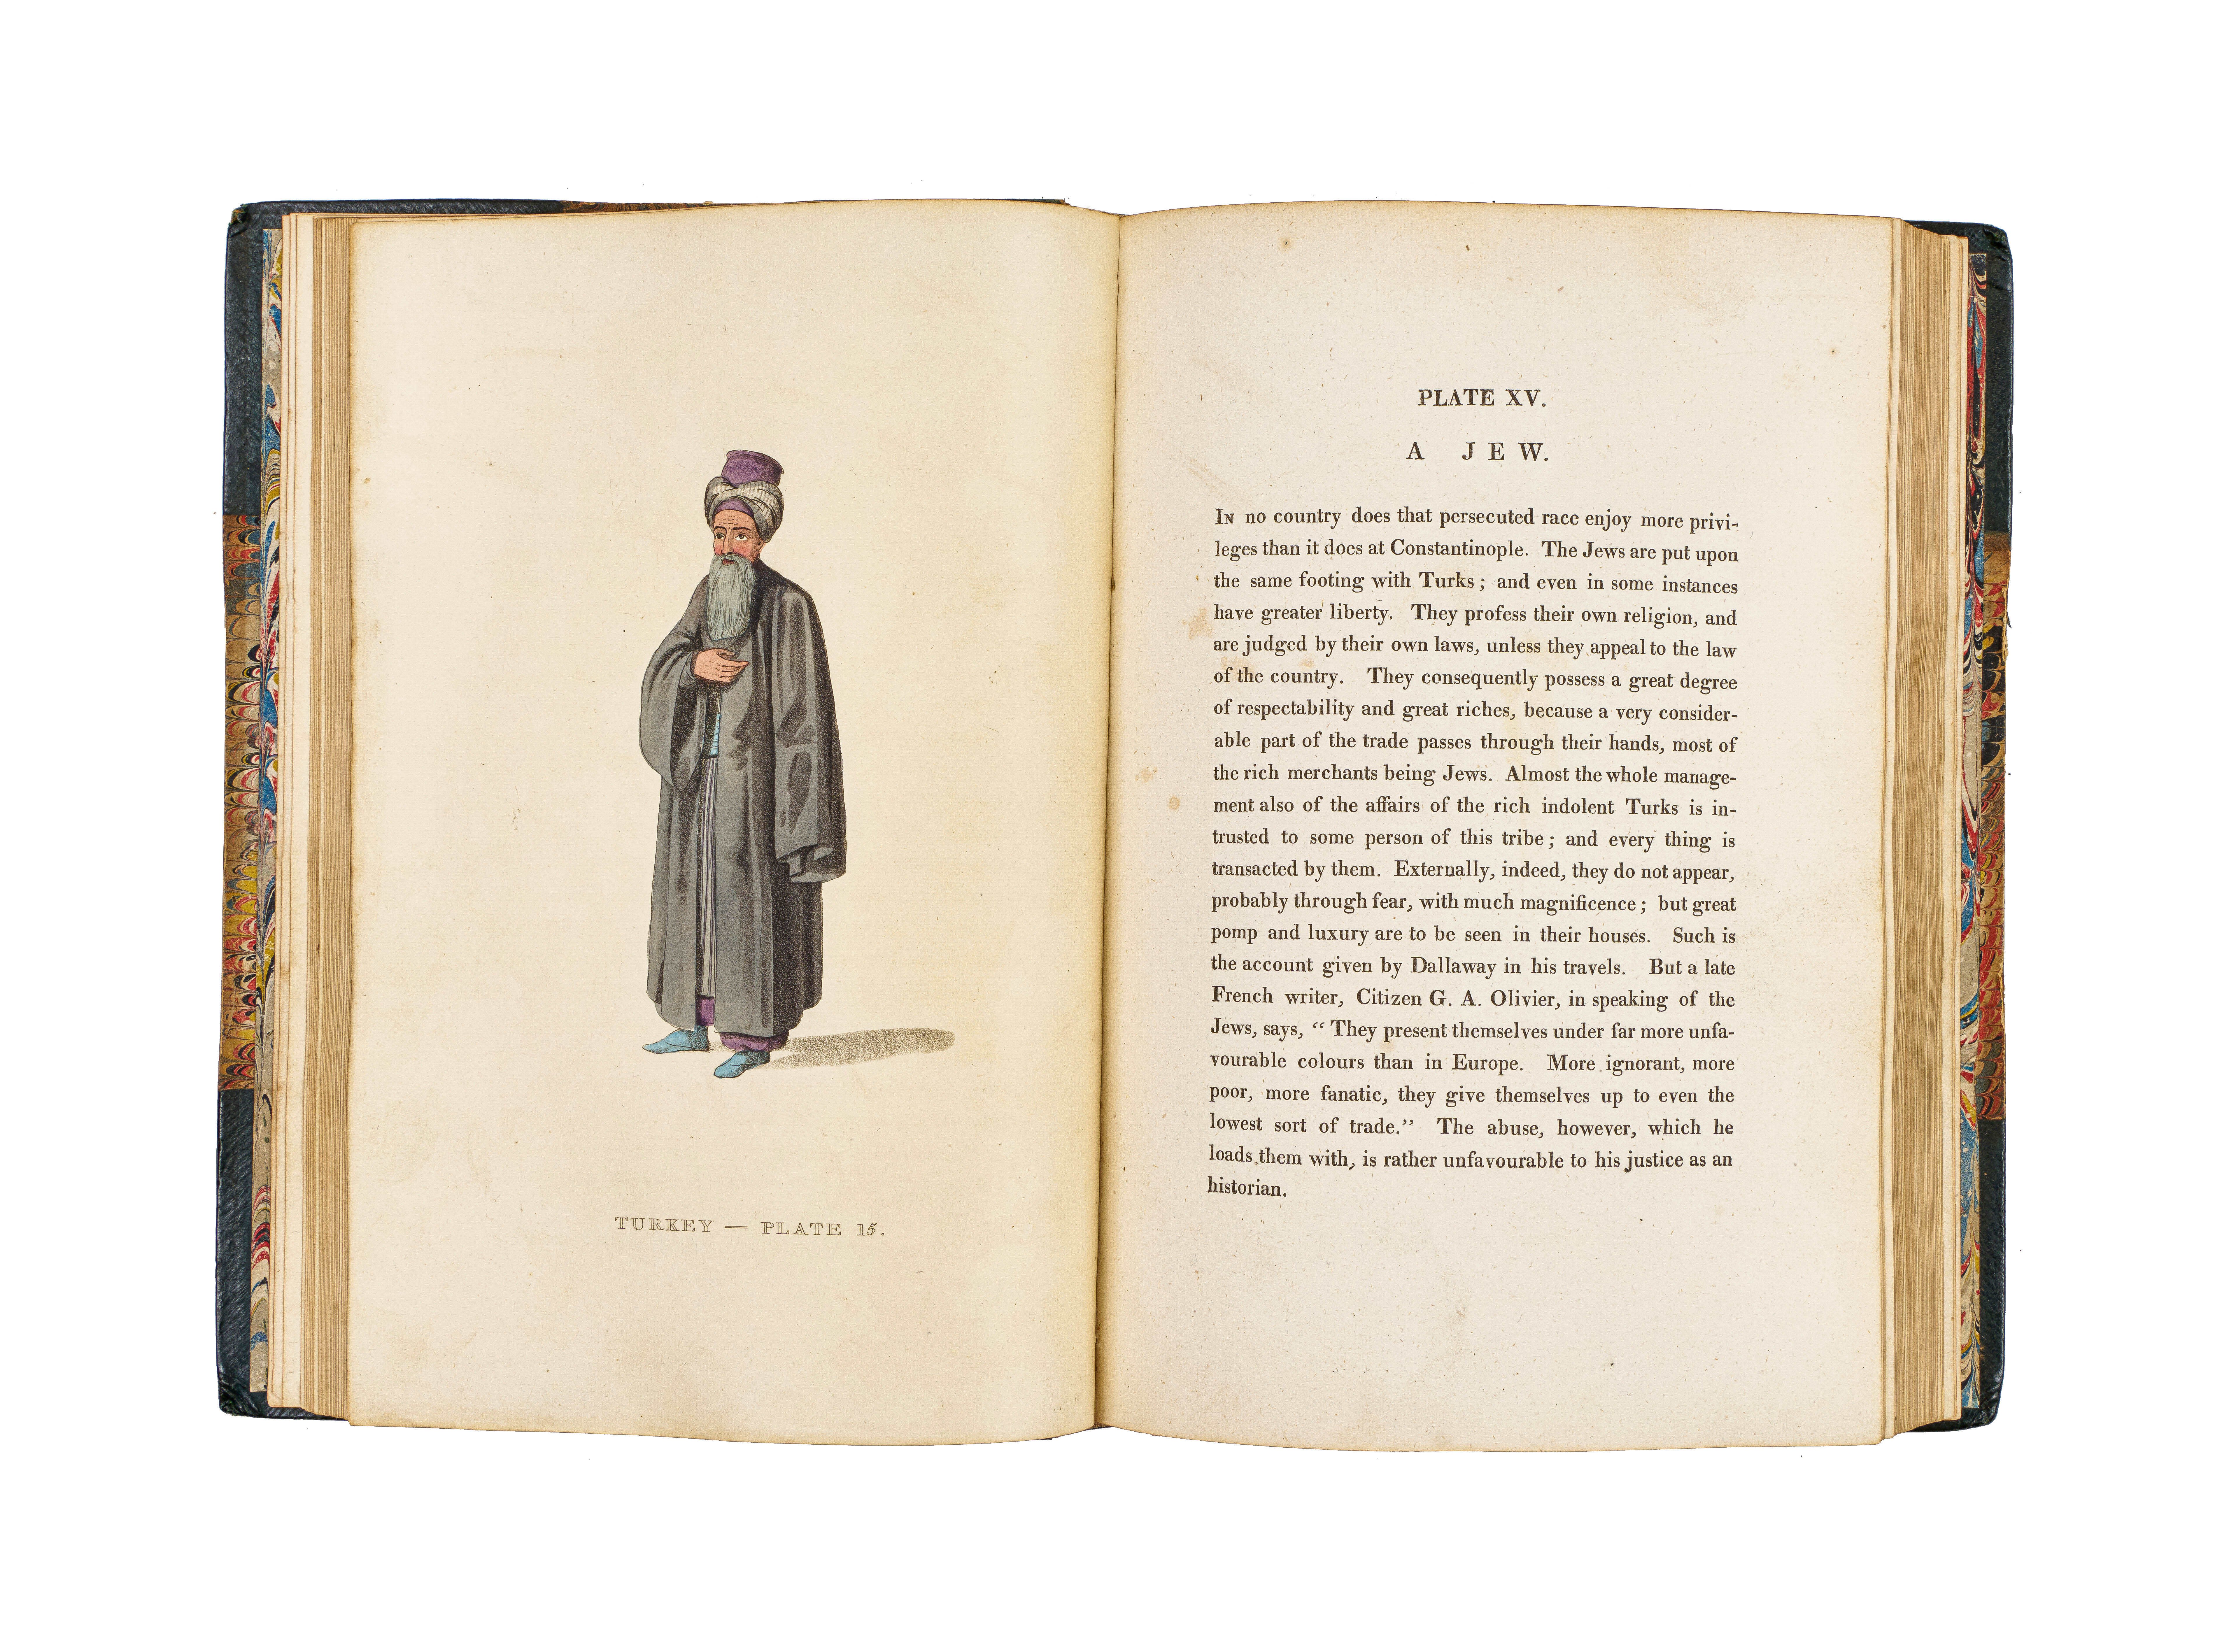 COSTUMES TURKEY, PICTURESQUE REPRESENTATIONS OF THE DRESS AND MANNERS OF THE TURKS, JOHN MURRAY, LON - Image 7 of 8